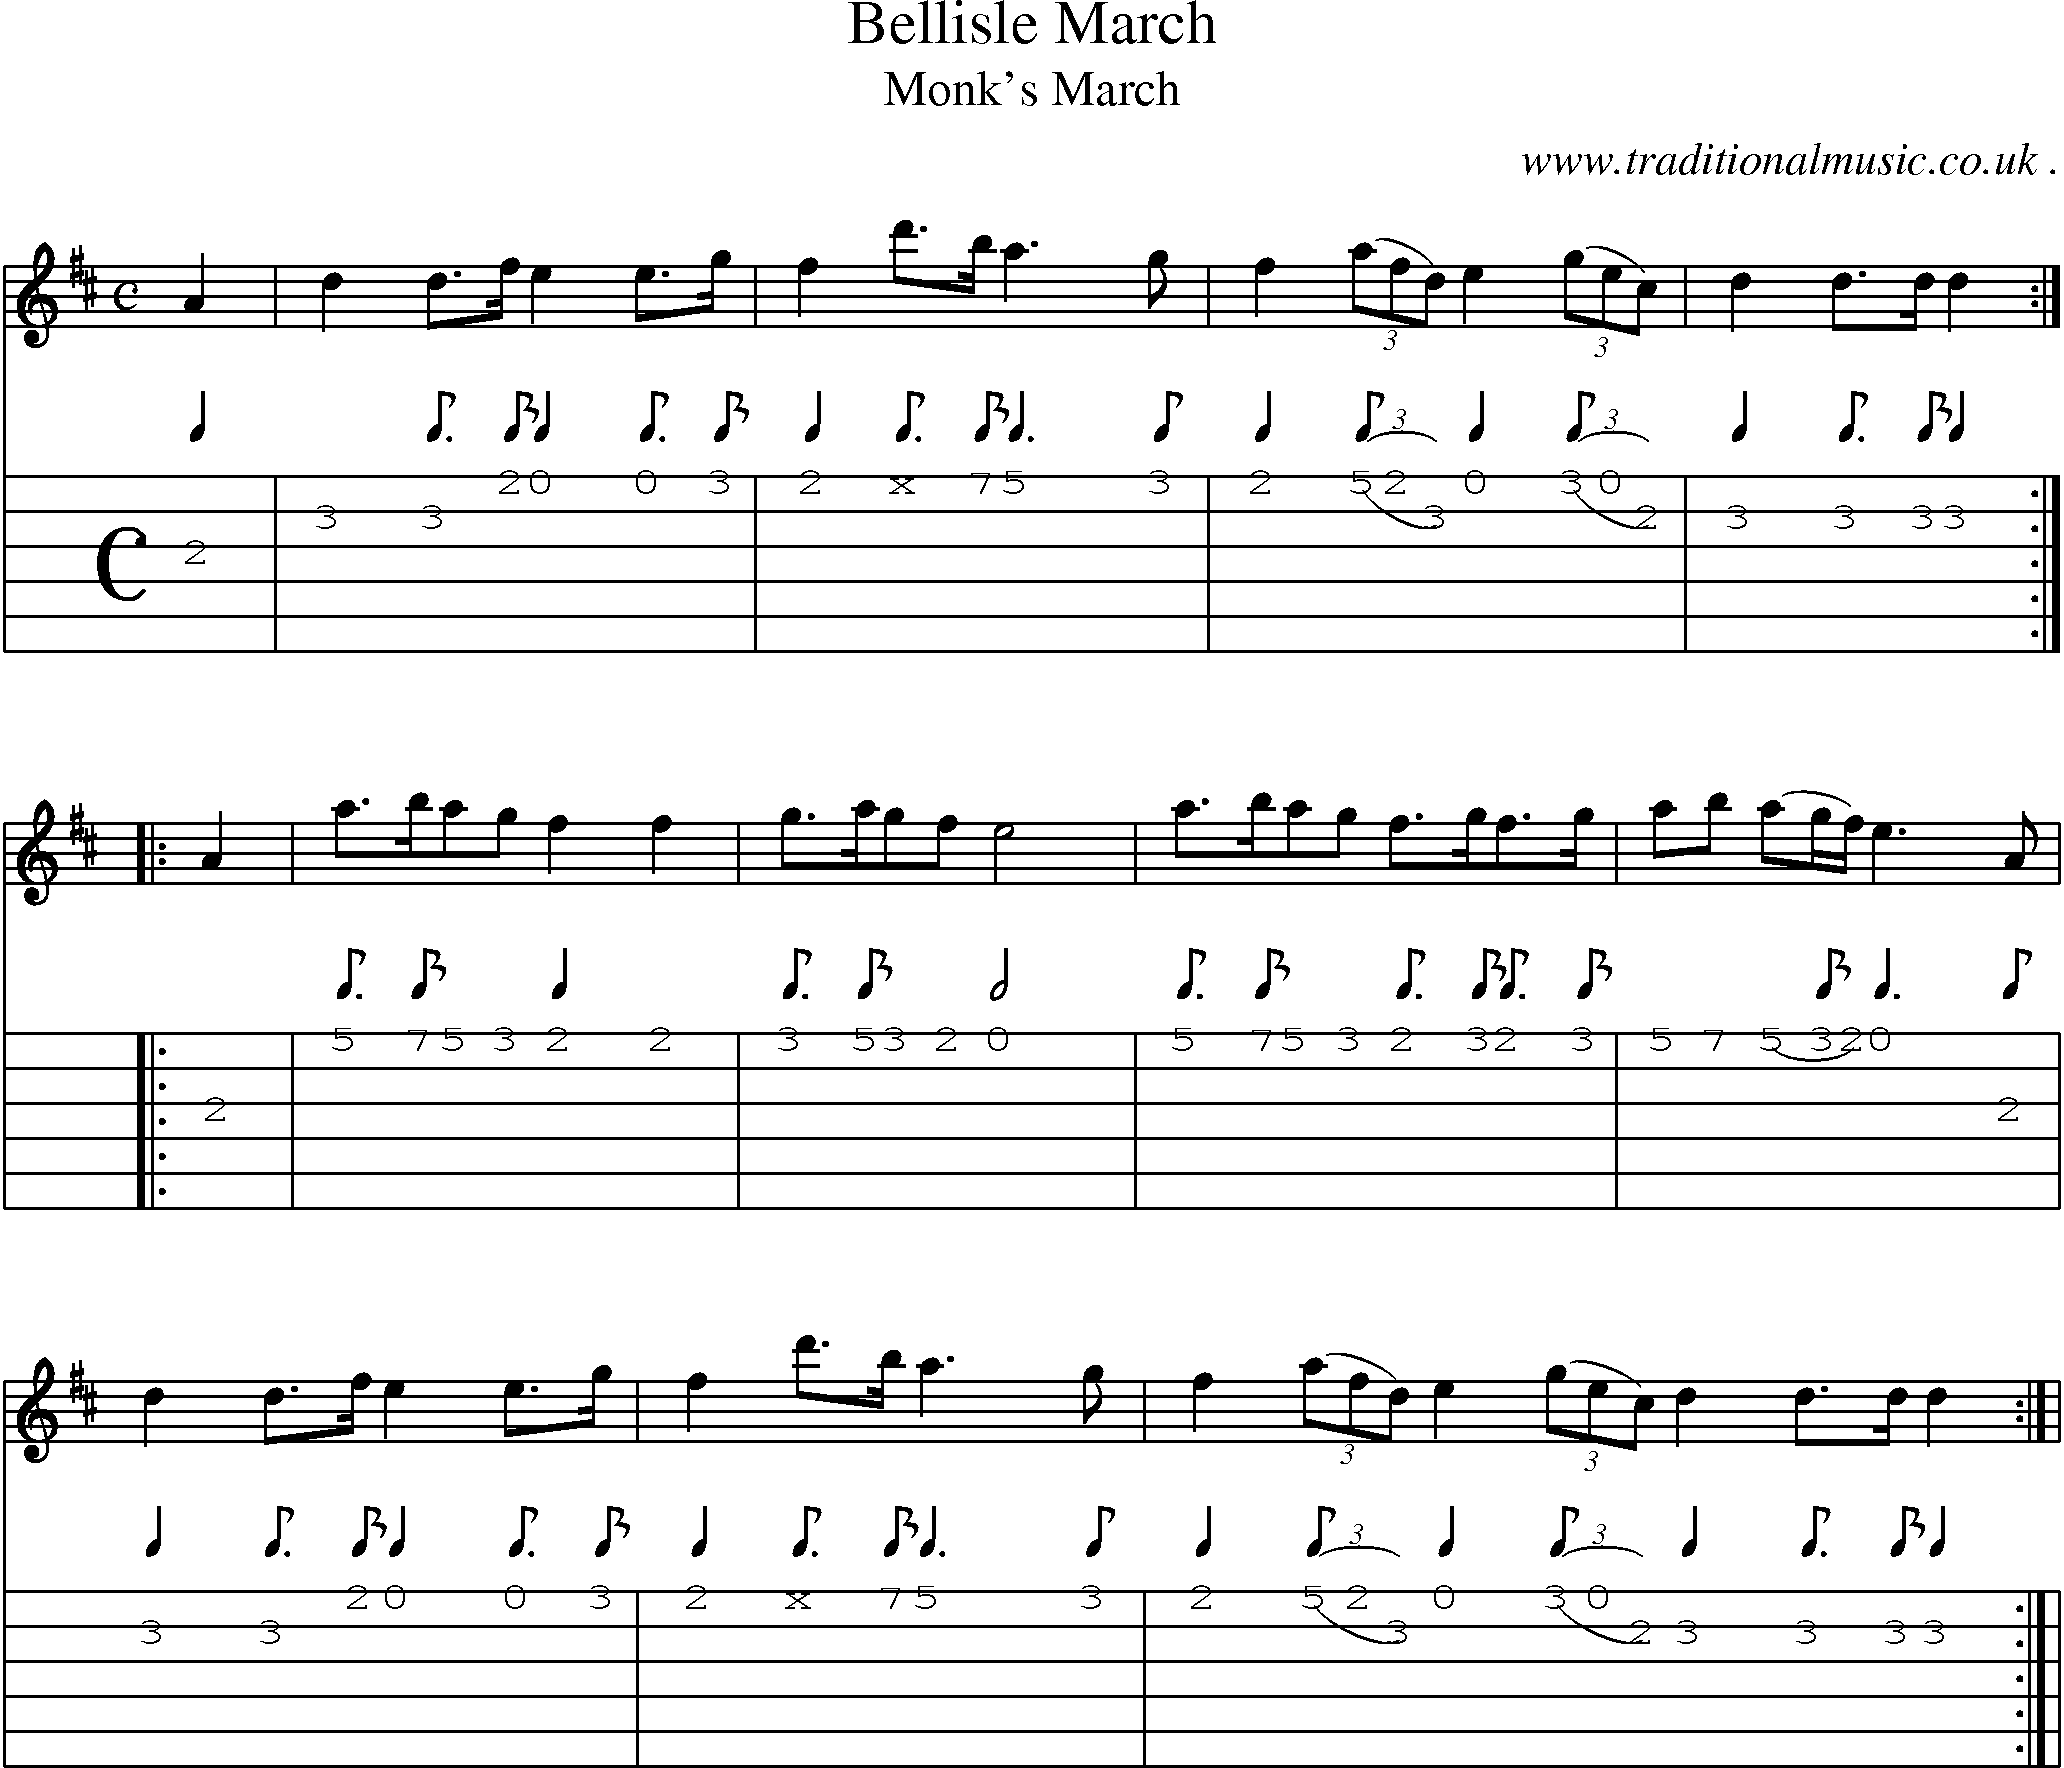 Sheet-Music and Guitar Tabs for Bellisle March